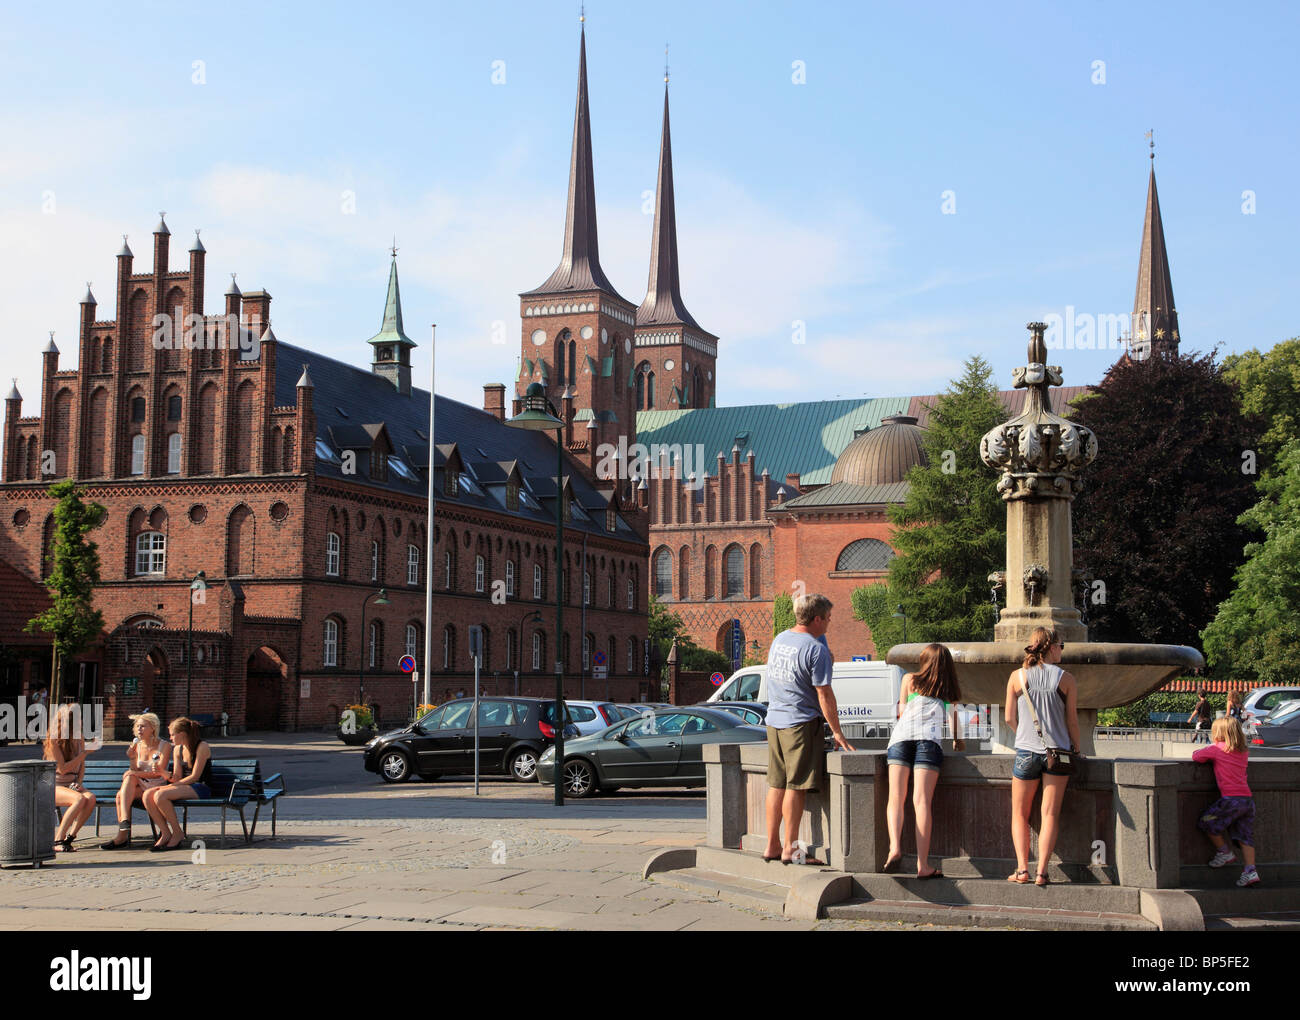 Denmark, Zealand, Roskilde, Cathedral, town hall, main square, people, Stock Photo